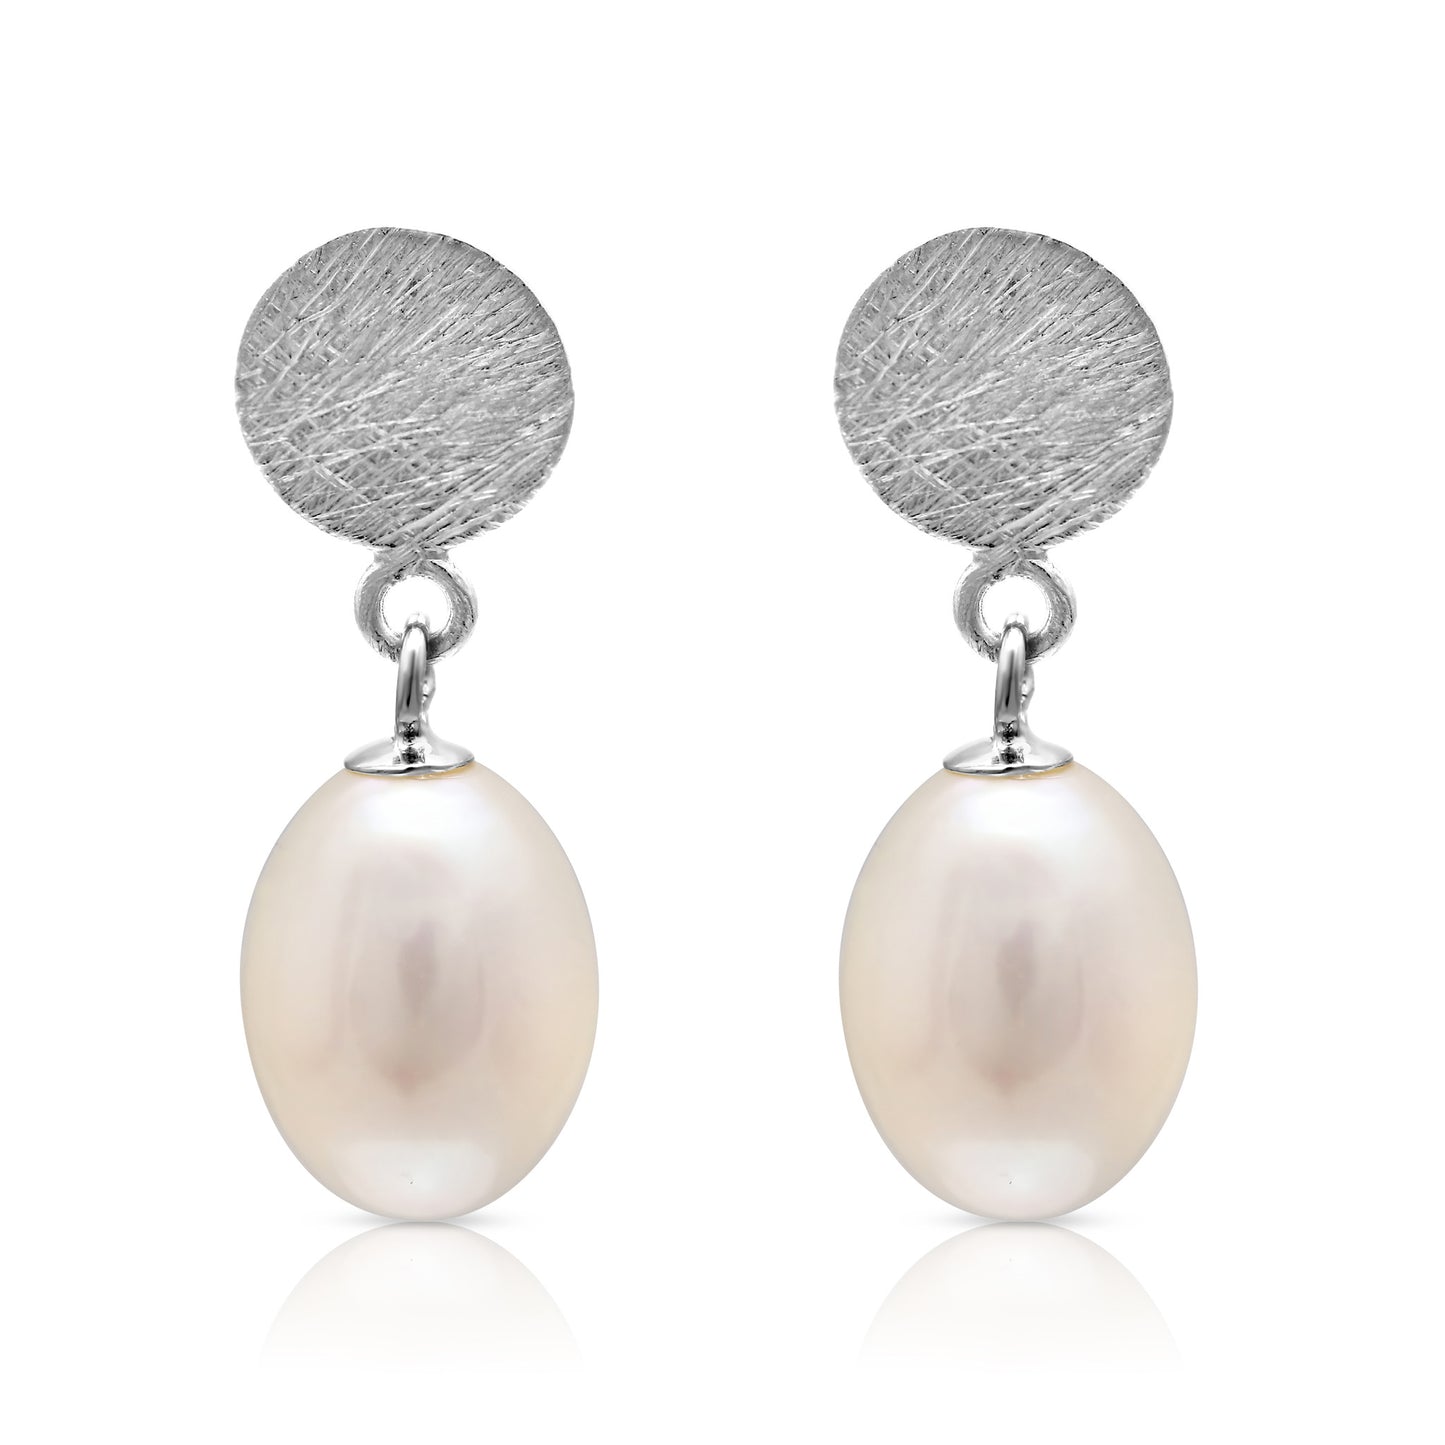 Credo Silver Disc Earrings with Cultured Freshwater Pearl Drops